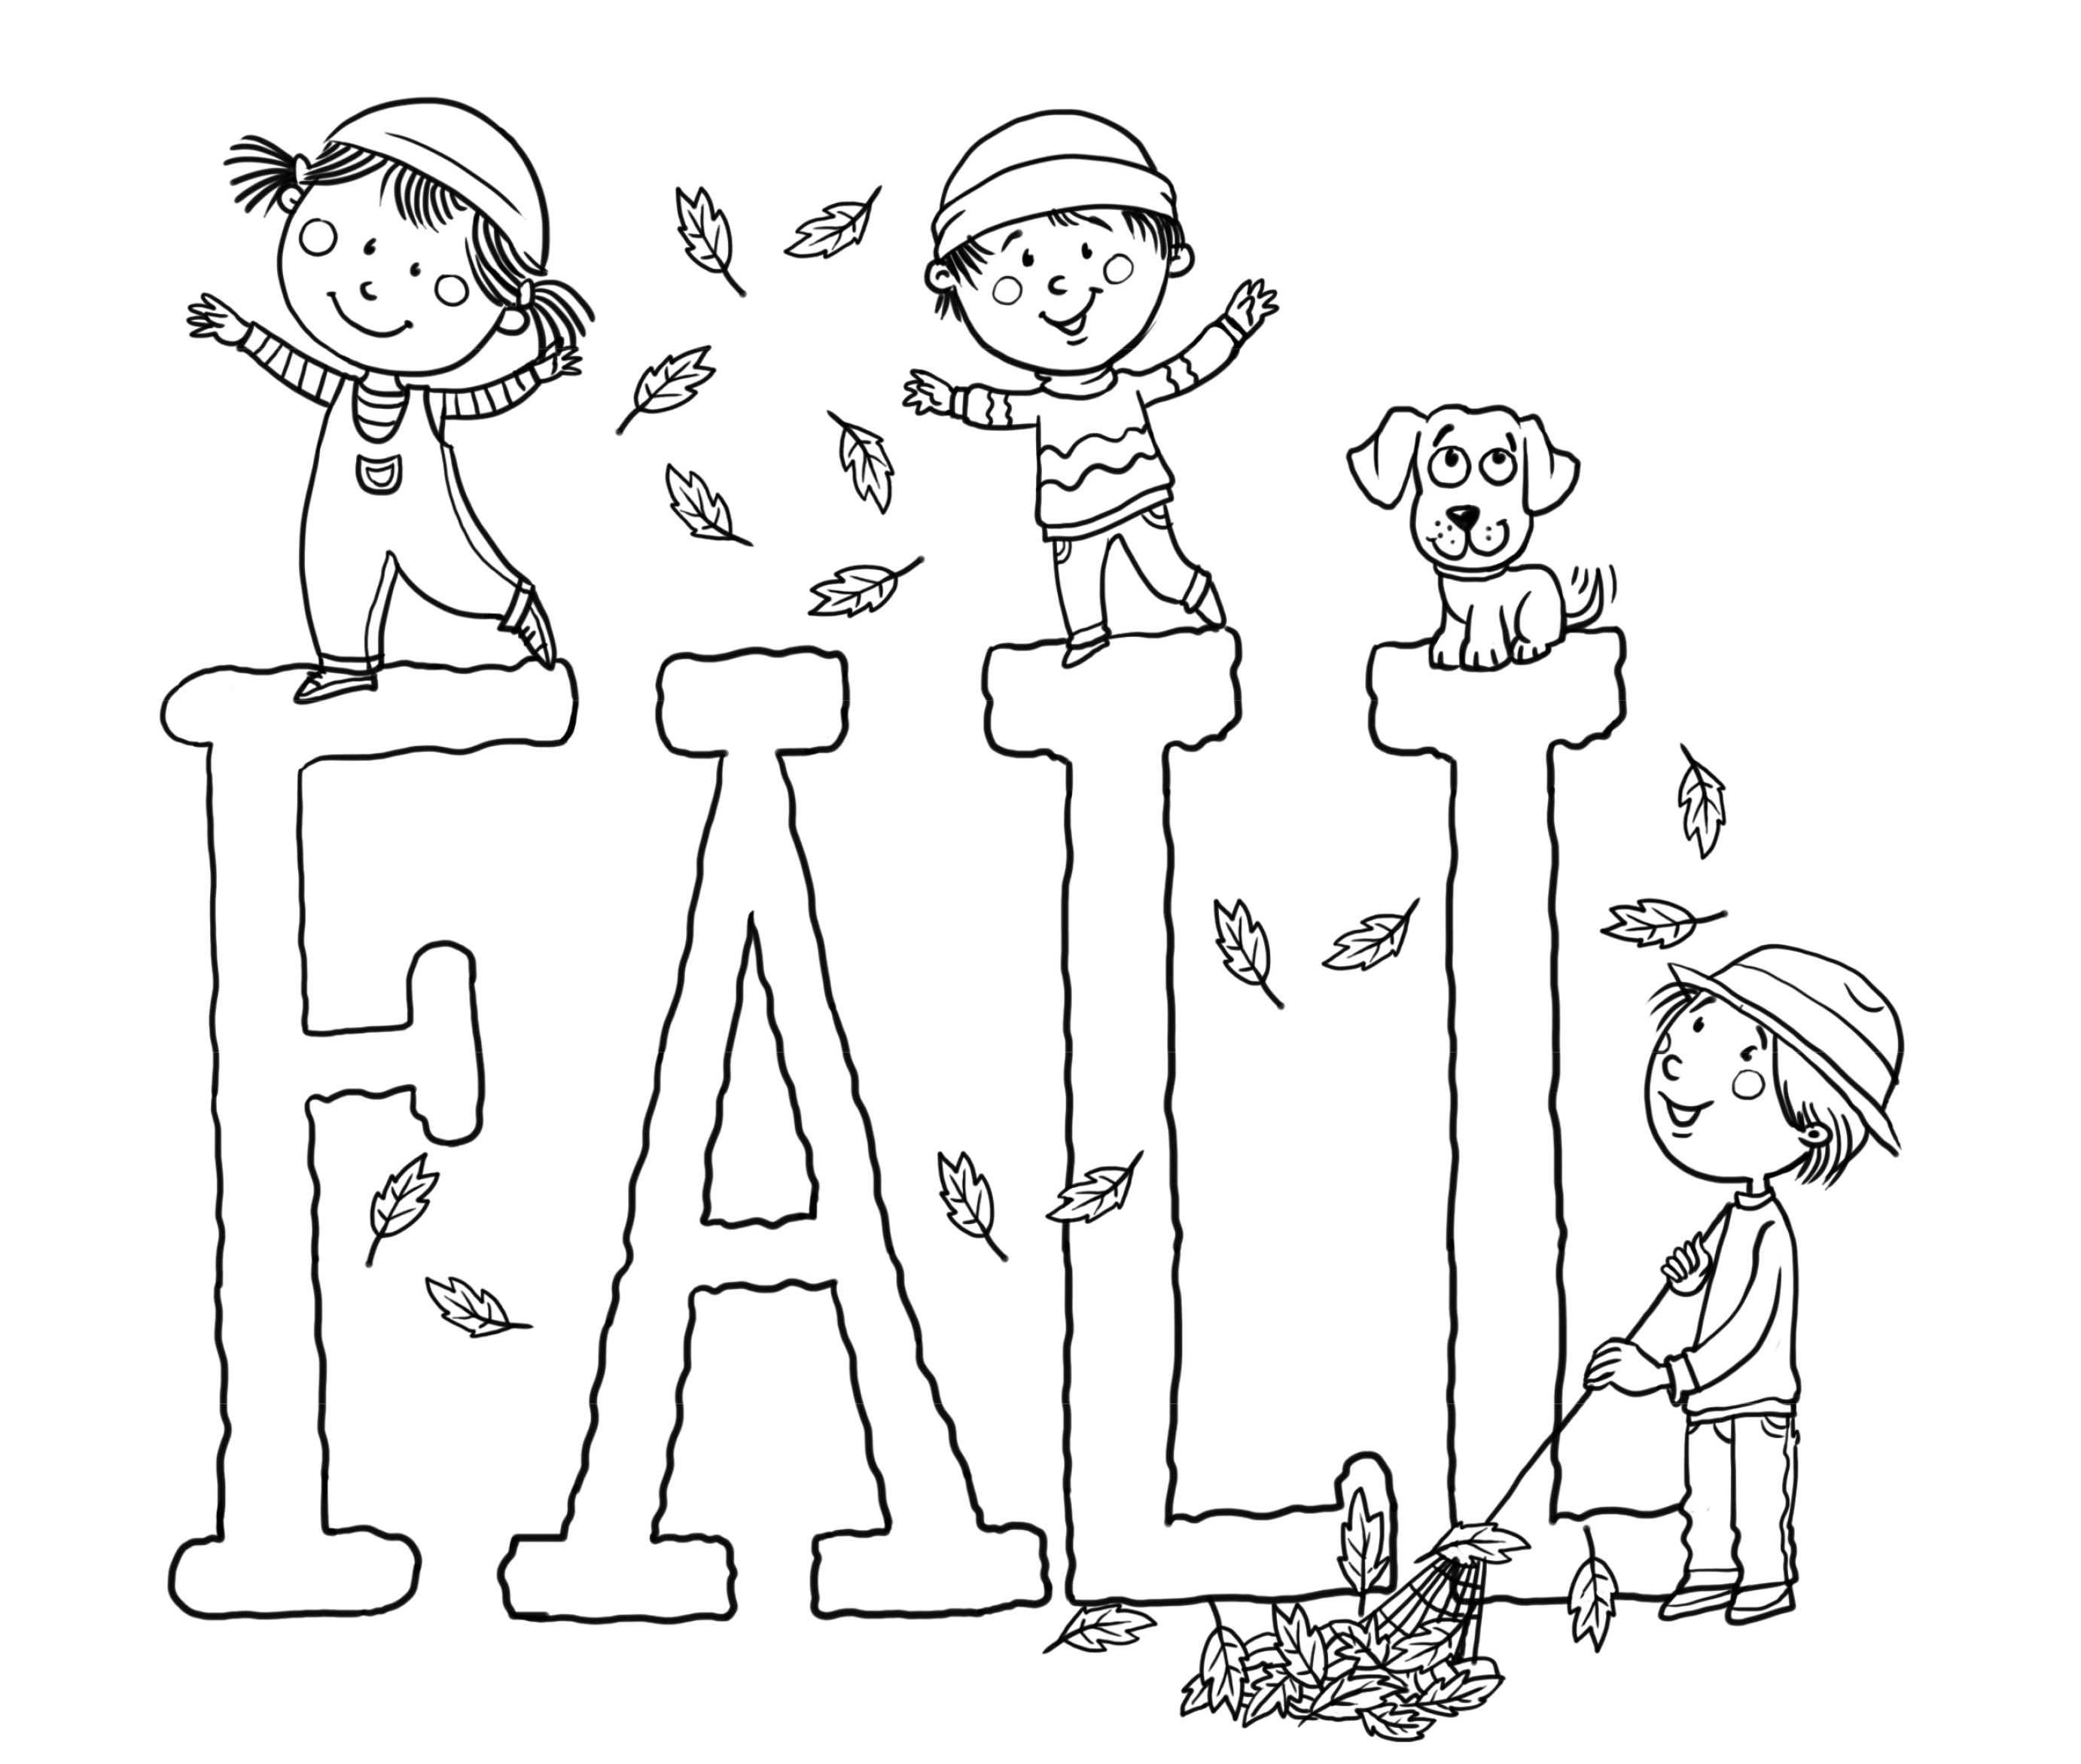 Free Printable Fall Coloring Pages For Kids - Best Coloring Pages - Free Printable Fall Coloring Pages